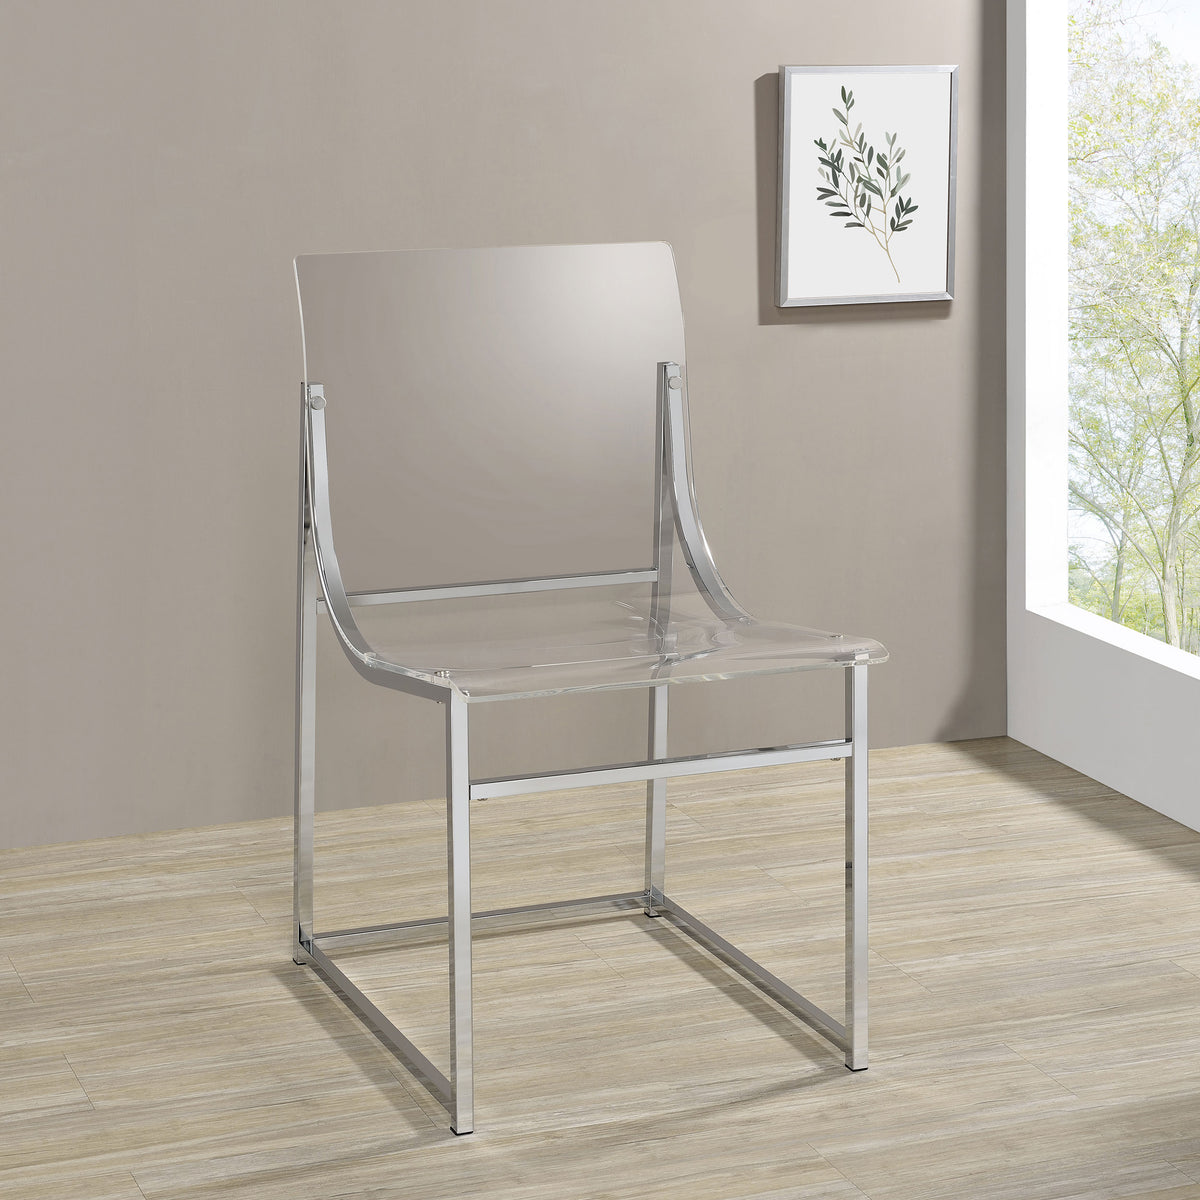 Adino Acrylic Dining Side Chair Clear and Chrome Adino Acrylic Dining Side Chair Clear and Chrome Half Price Furniture